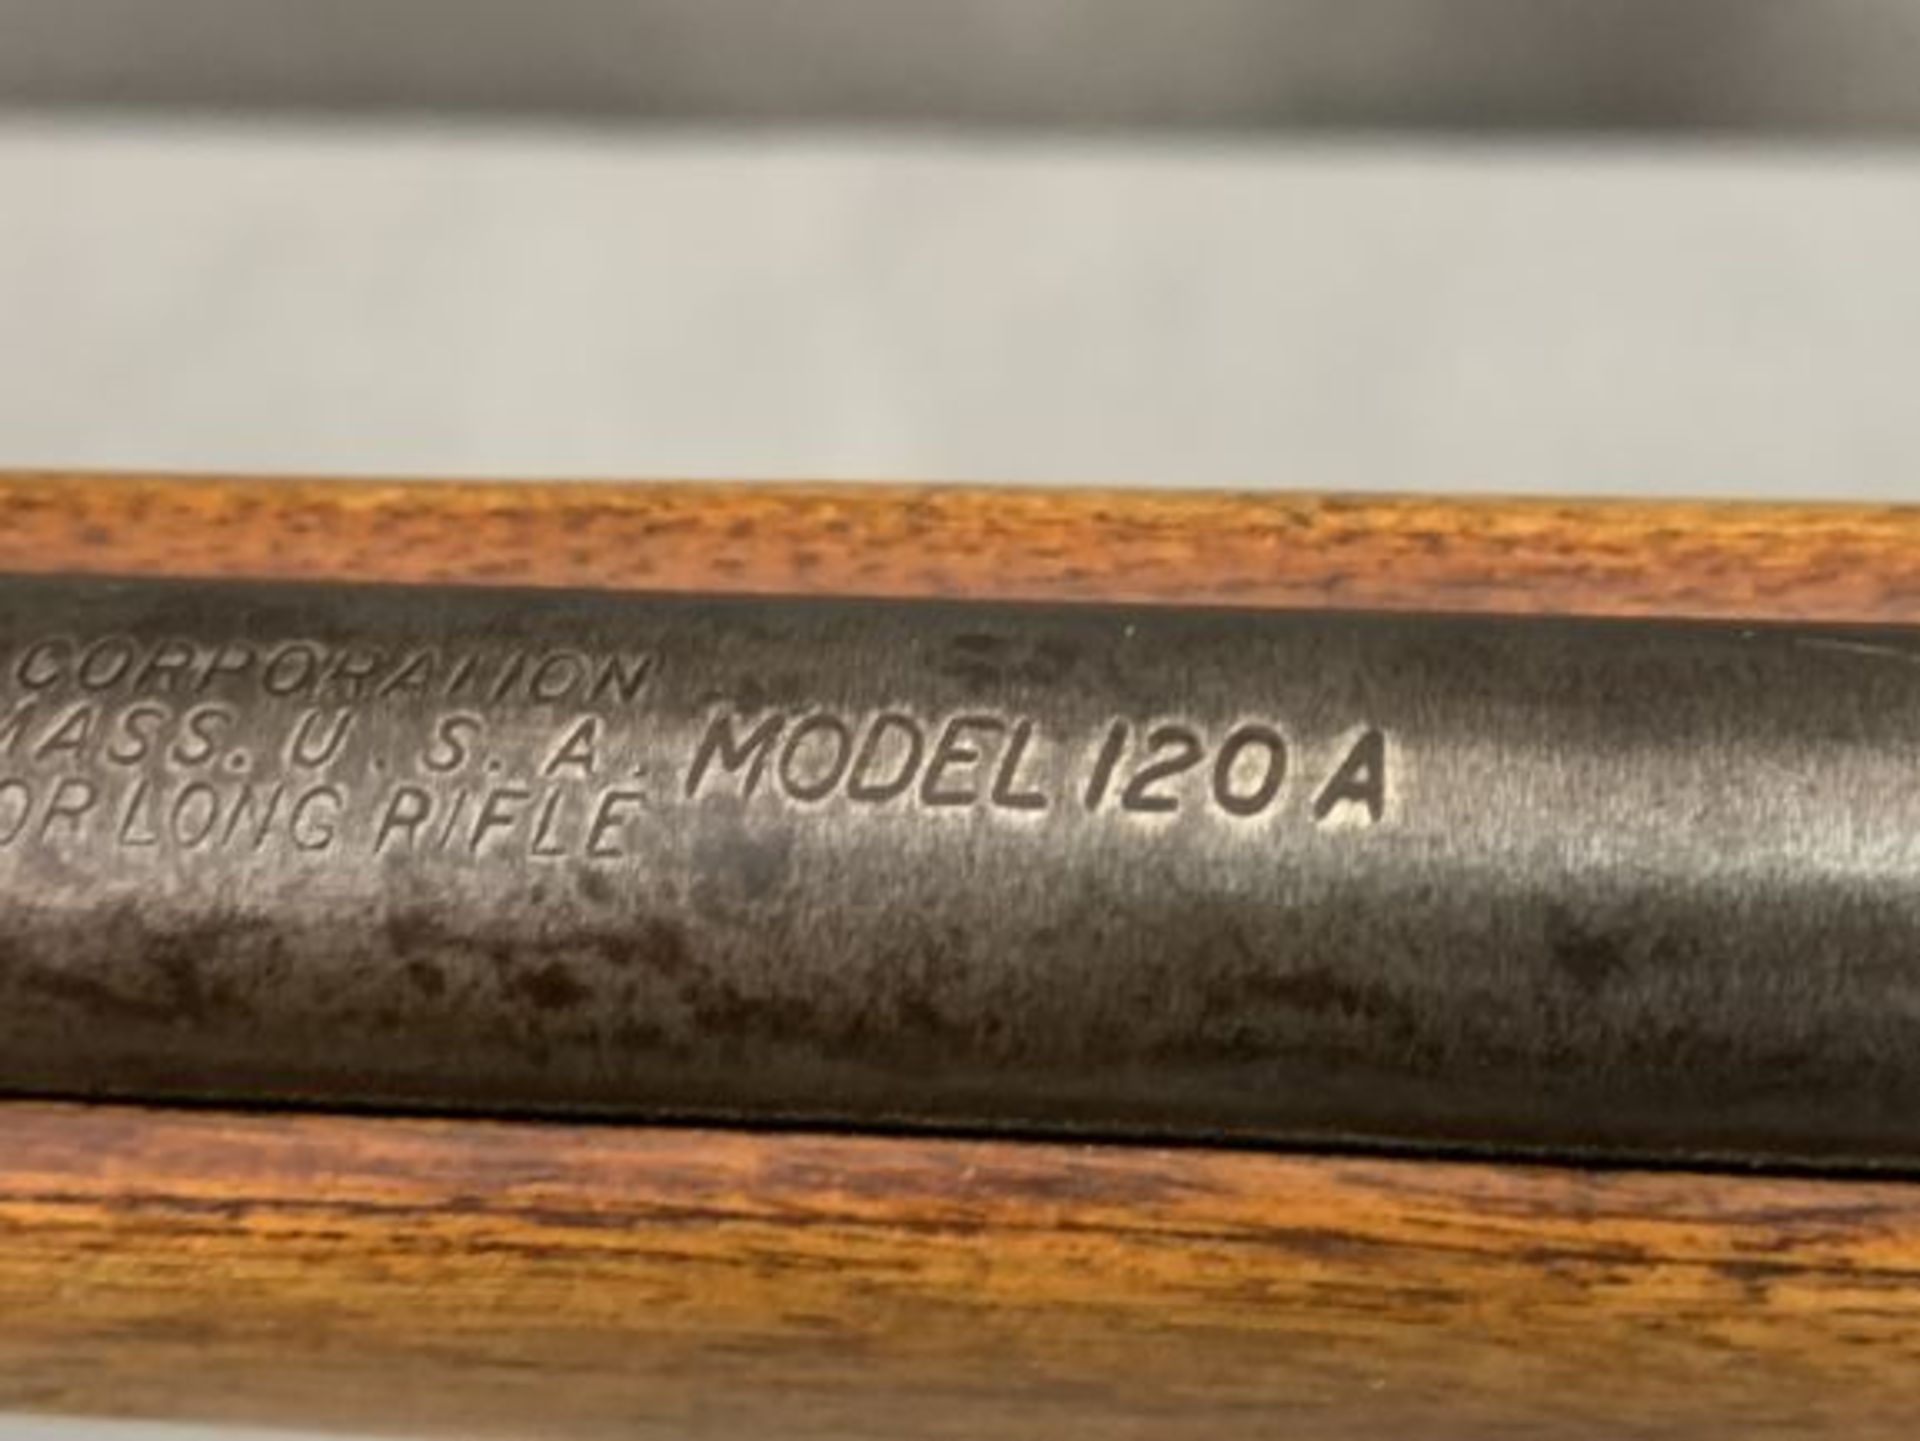 204. Springfield 120A .22 S,L,LR Bolt Action Single Shot SN: NONE - Image 5 of 11